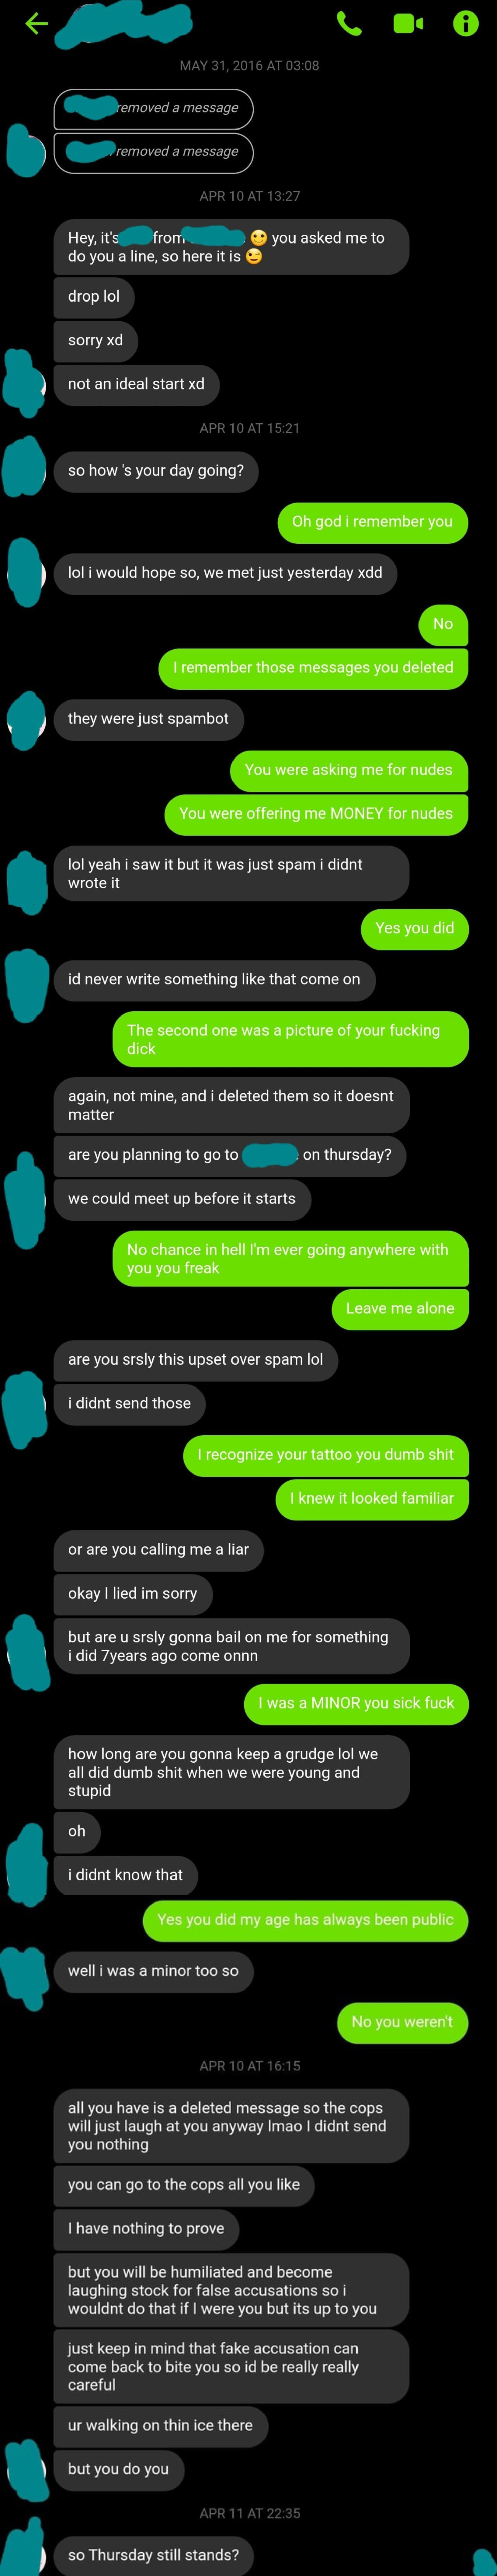 guy pretends his dick pics were just spam and then tells her no cop would believe her and she&#x27;d be humiliated and then a couple hours later still asks if they&#x27;re on for thursday